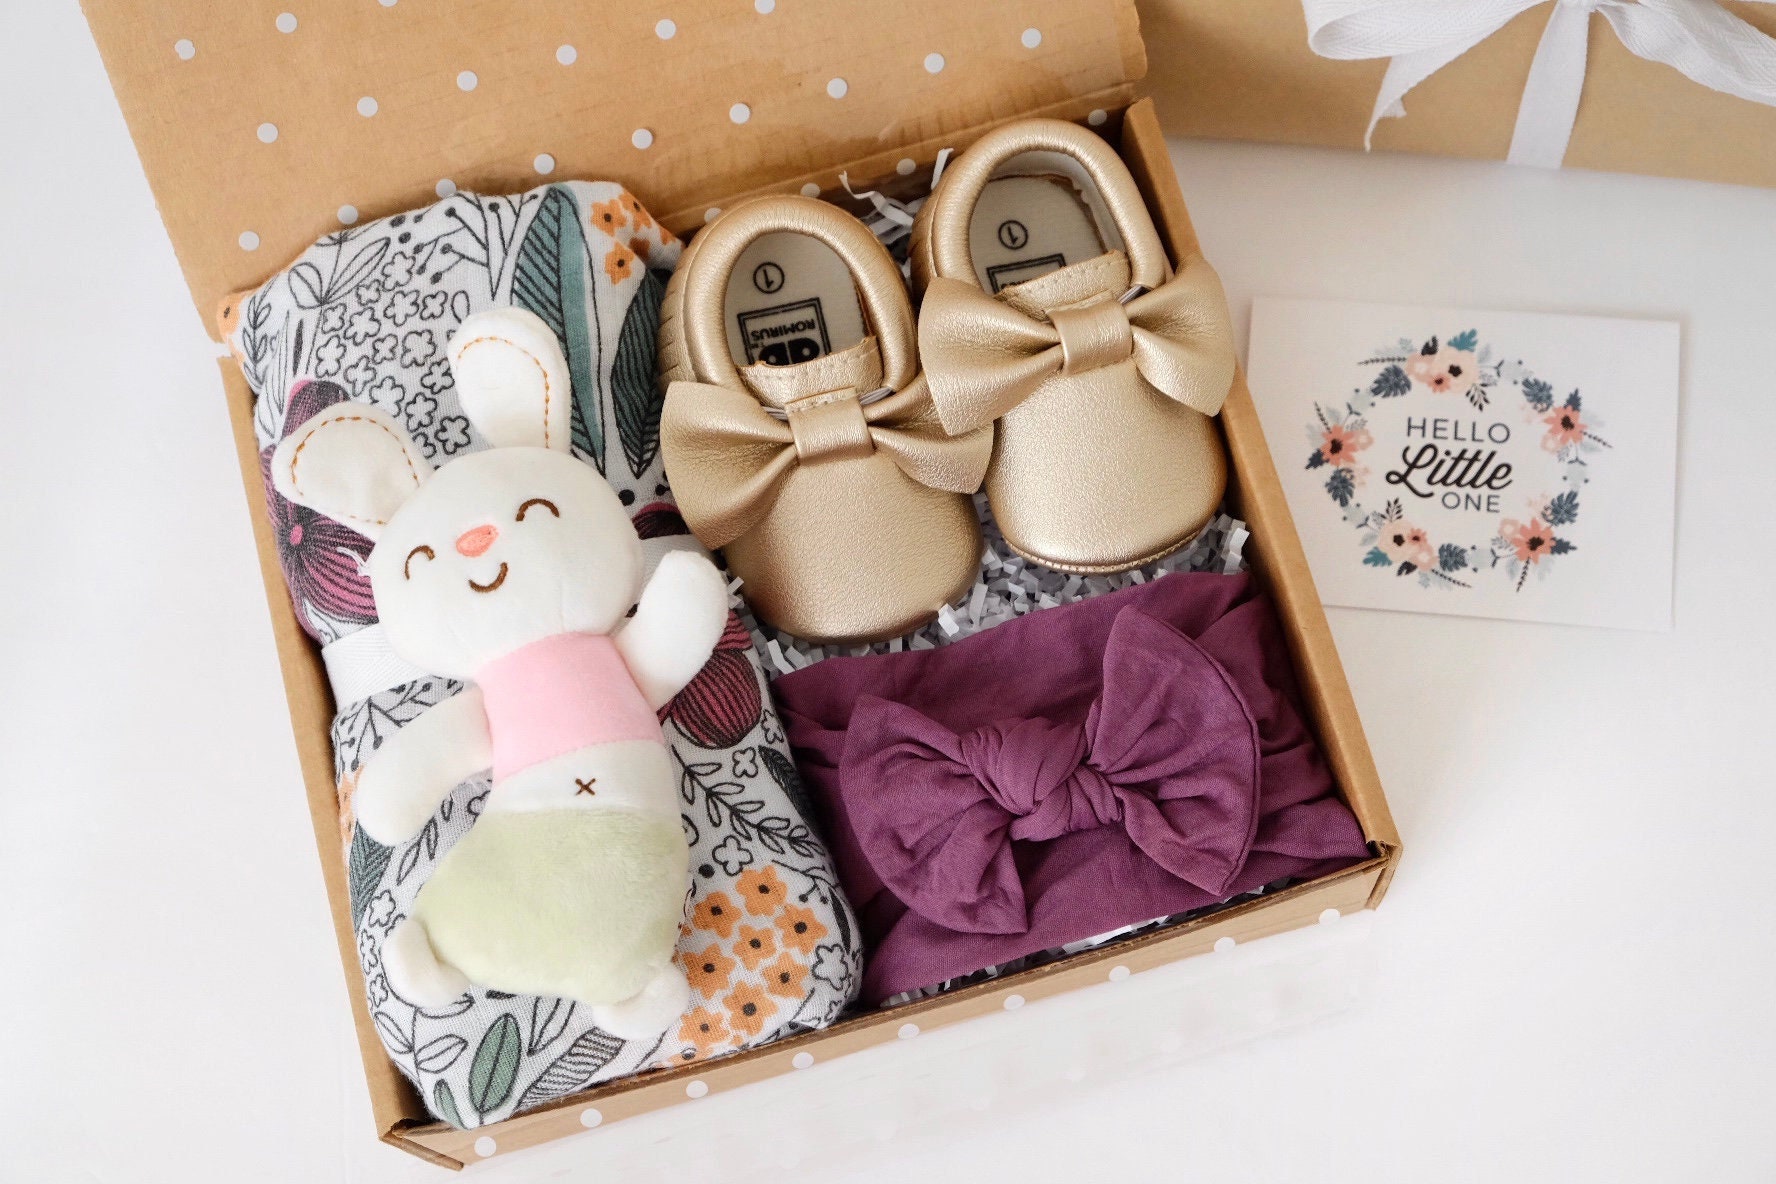 The Best Gifts to Send Someone Who Just Had a Baby - The Cutest Newborn Baby  Gifts - JetsetChristina